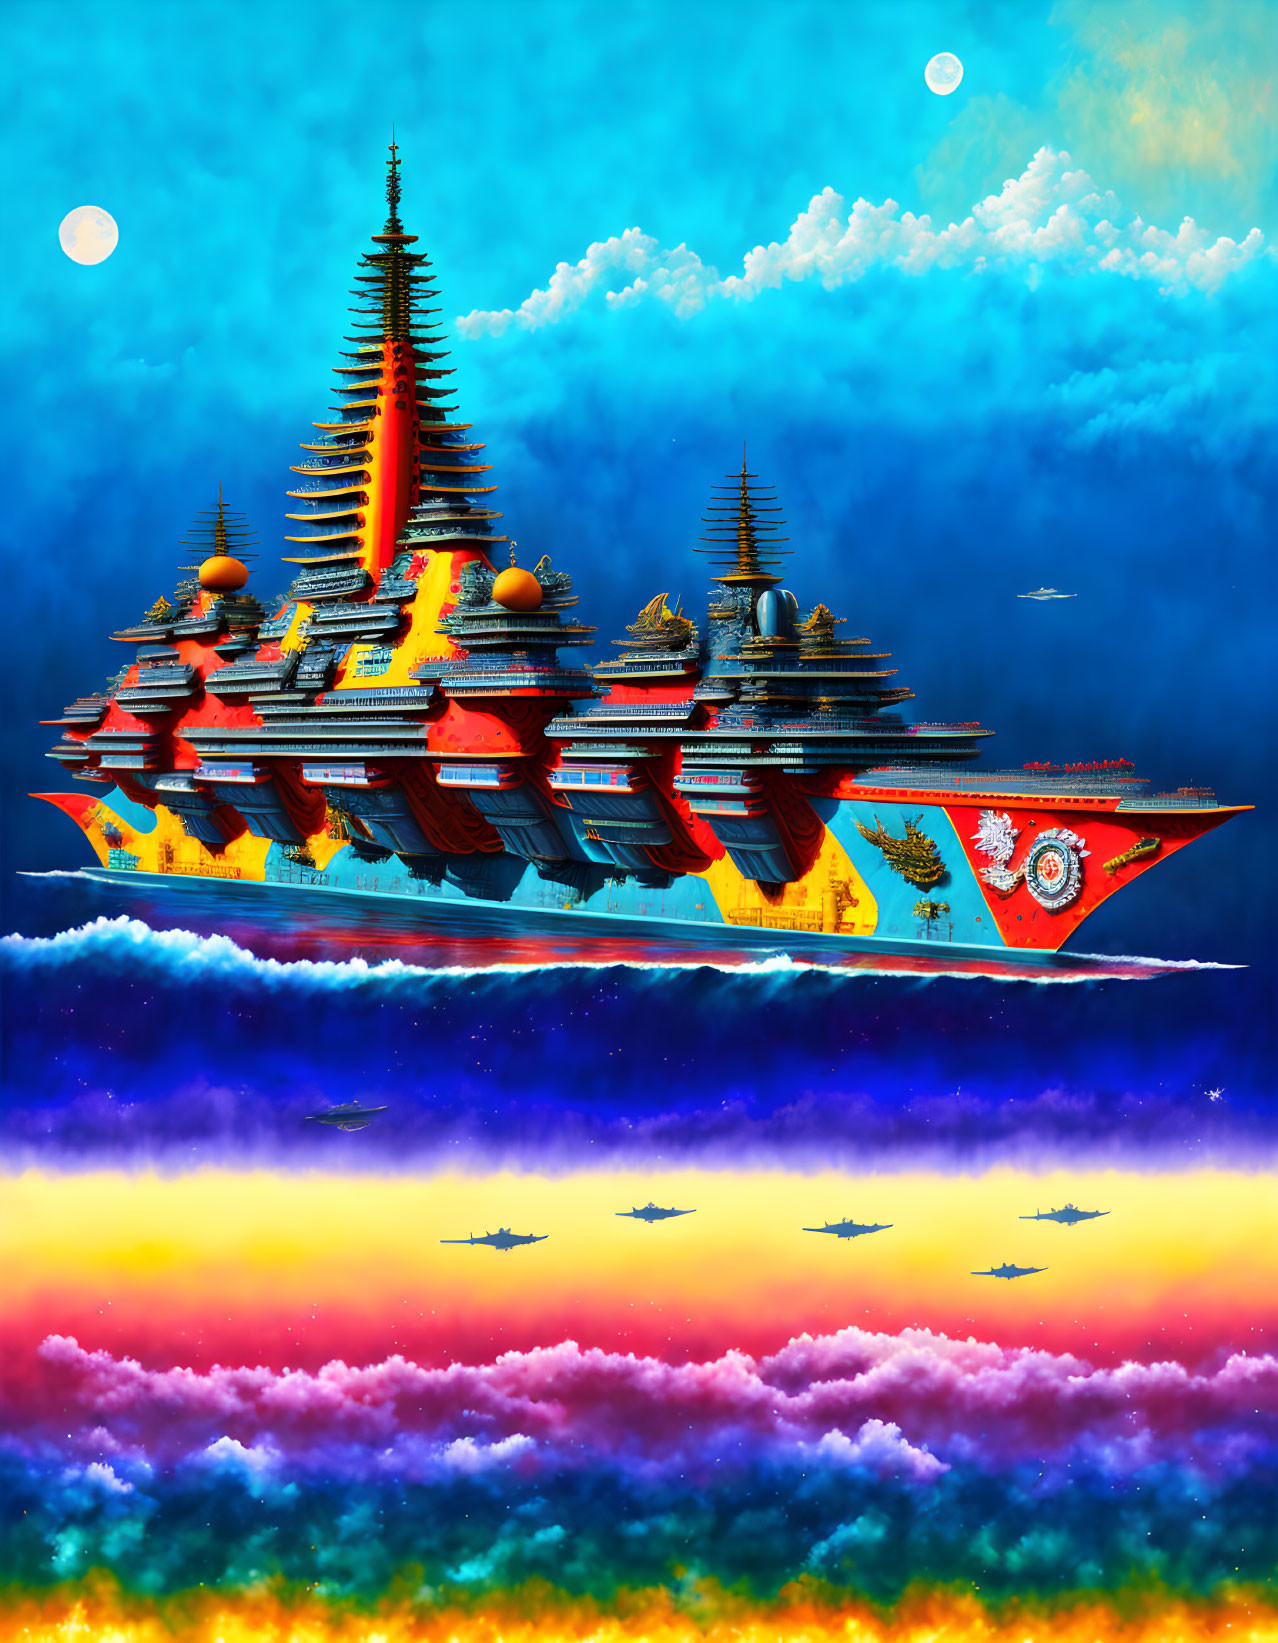 Fantastical, Multi-Layered Pagoda Structure with Floating Ship Hull